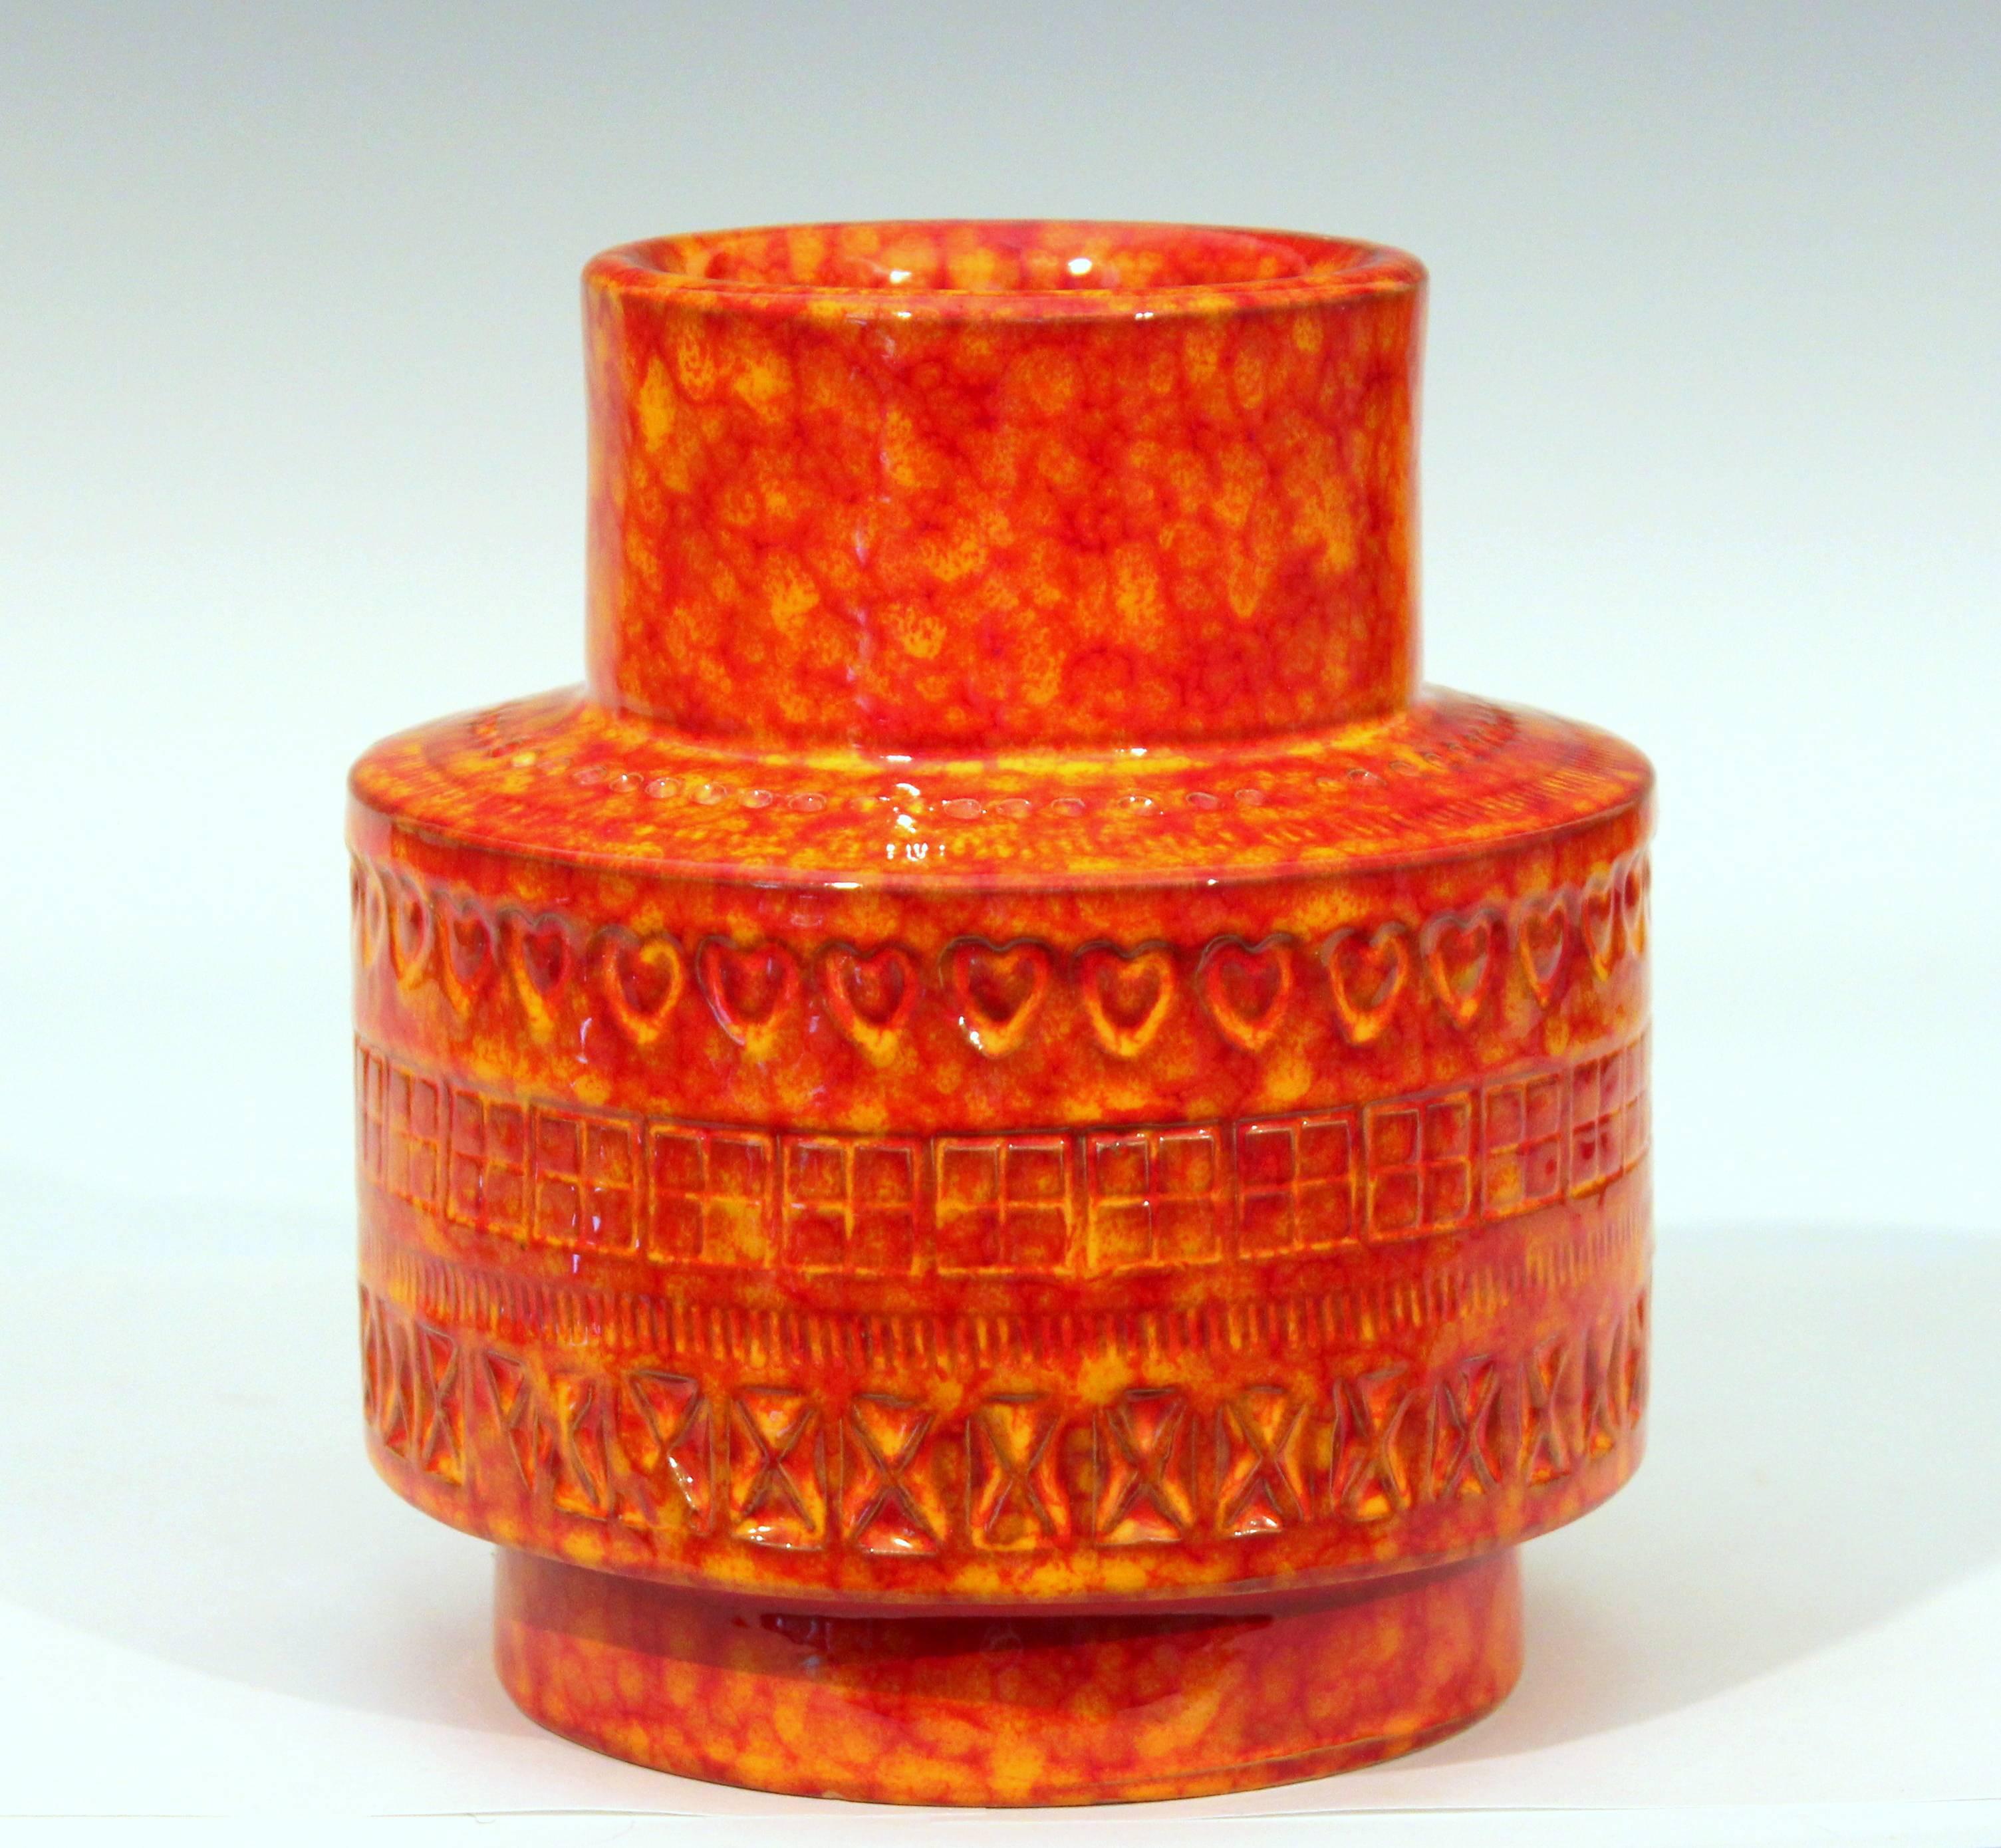 Vintage hand-turned Bitossi vase in stovepipe form with impressed Rimini decor on a bright red and yellow mottled glaze ground, circa 1960s. Measures: 6 1/2